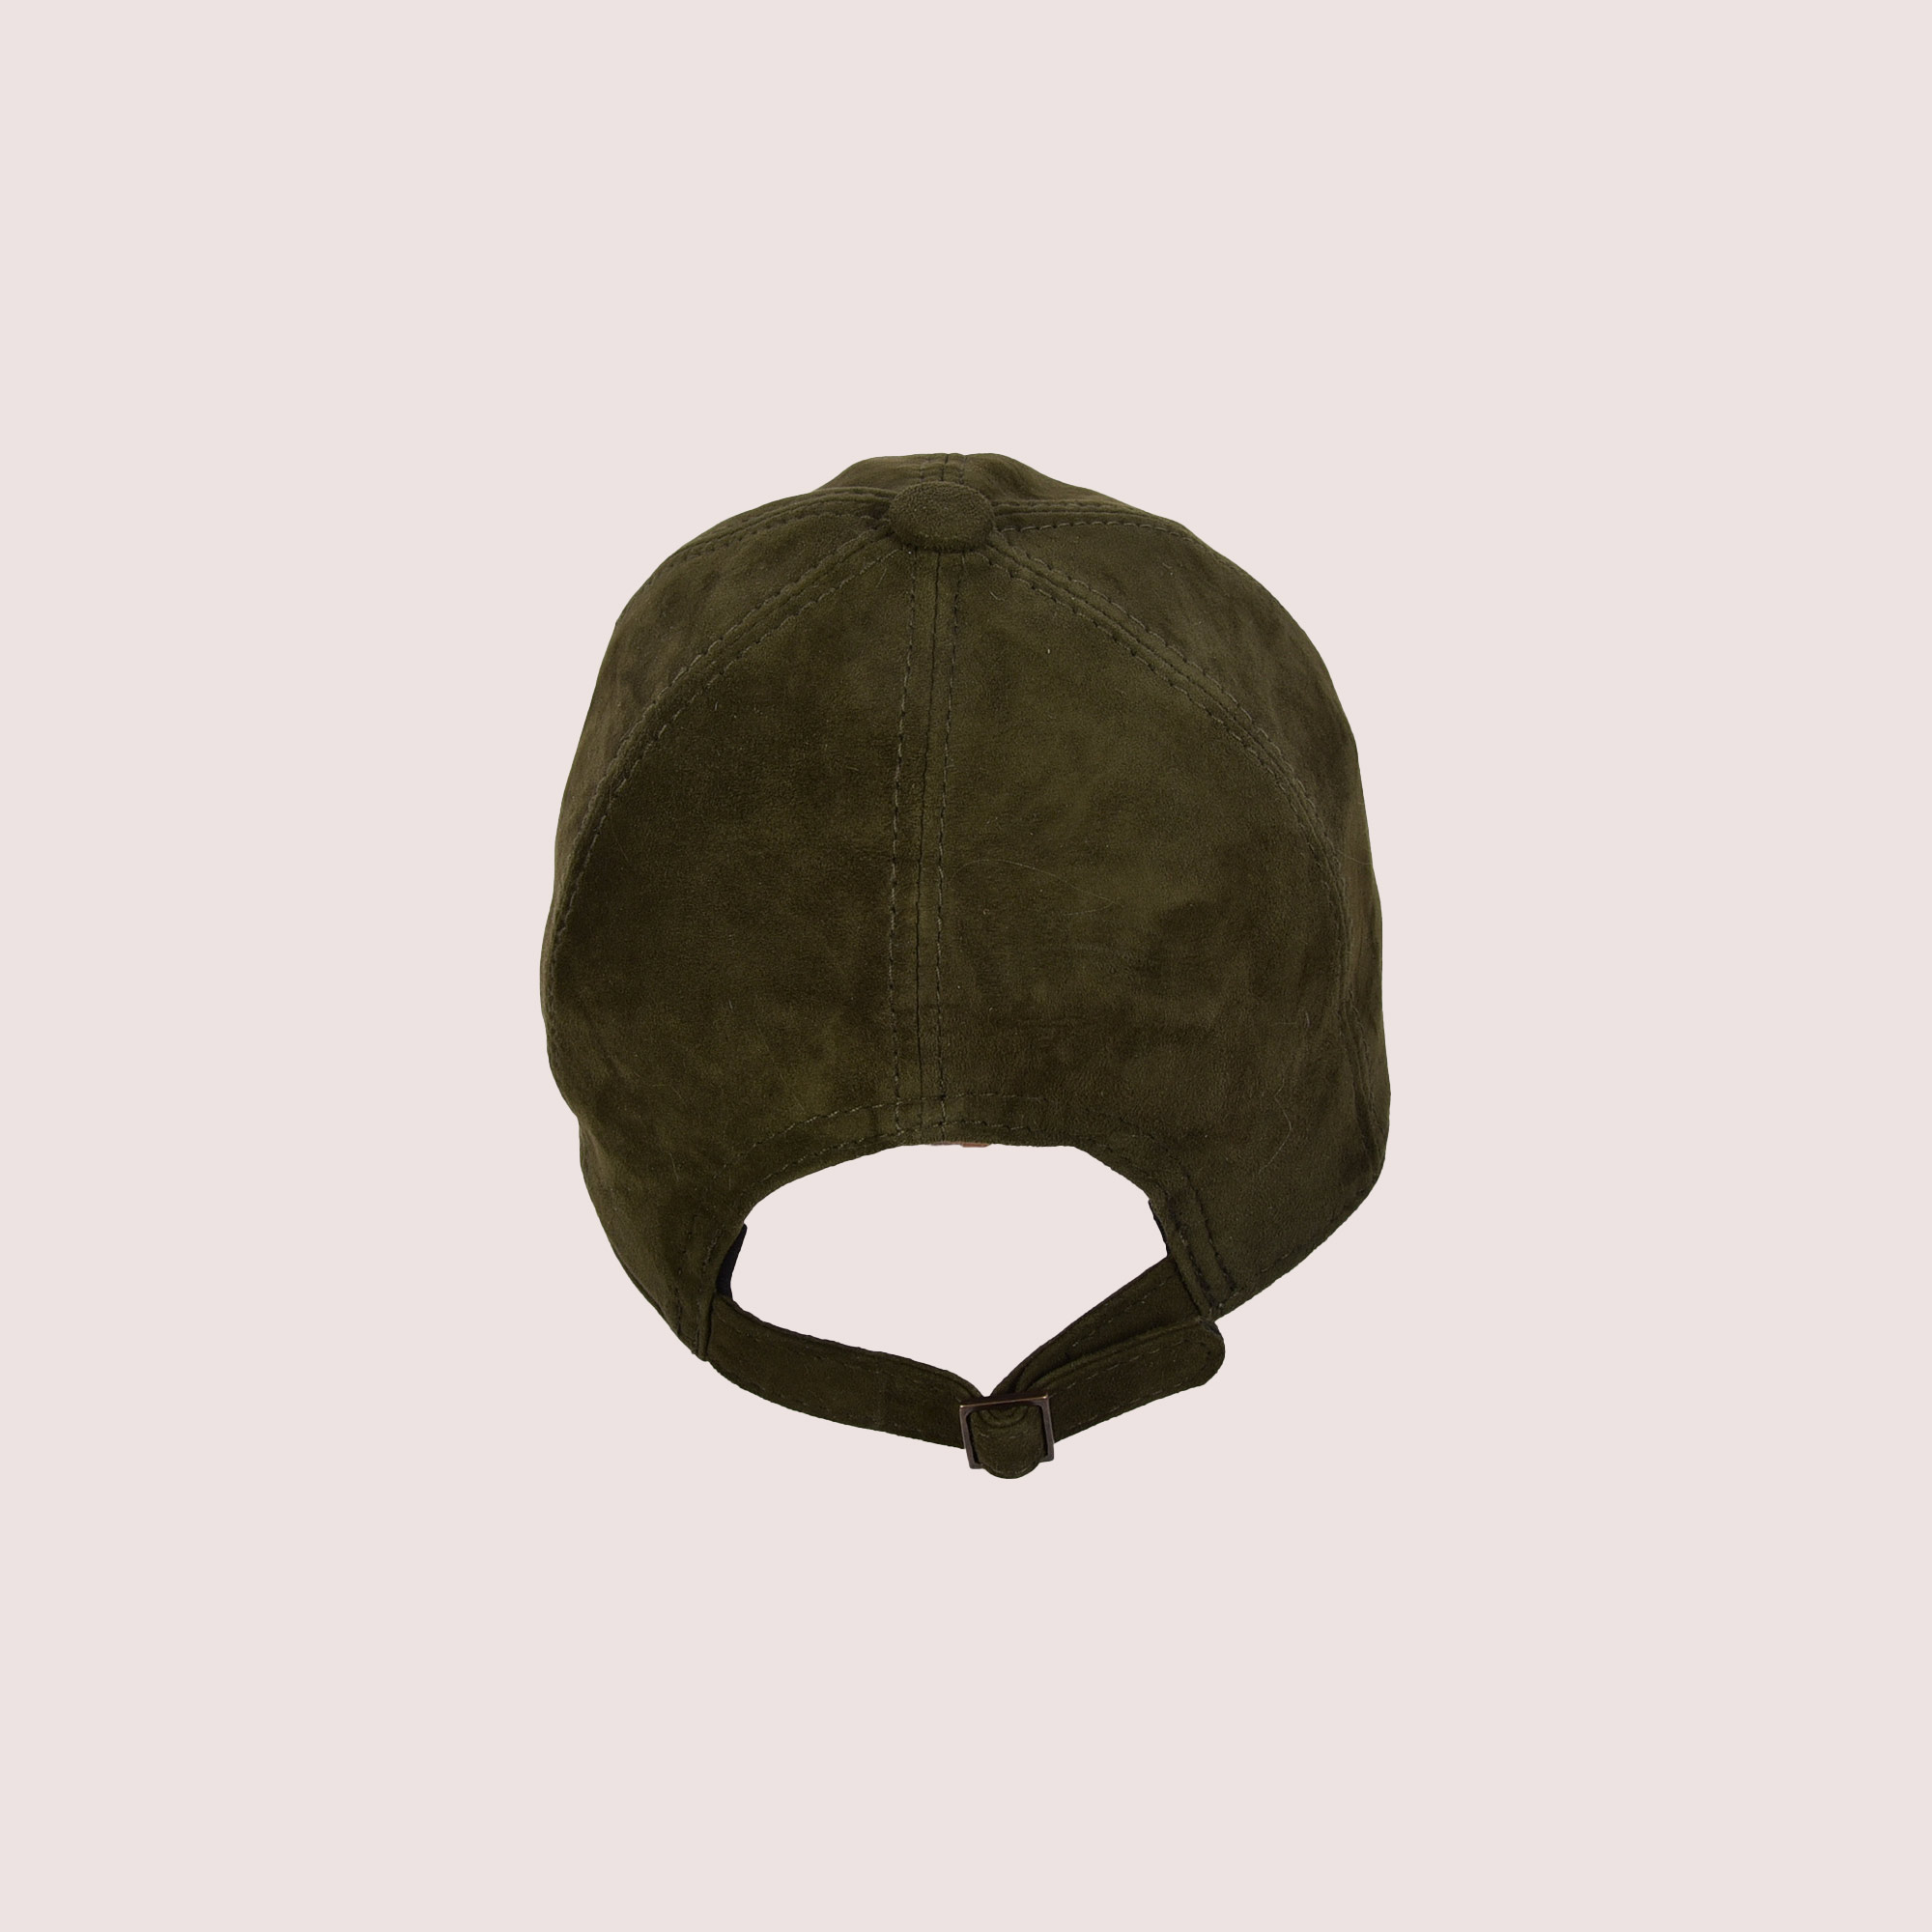 Albion Goat Suede Baseball Hat